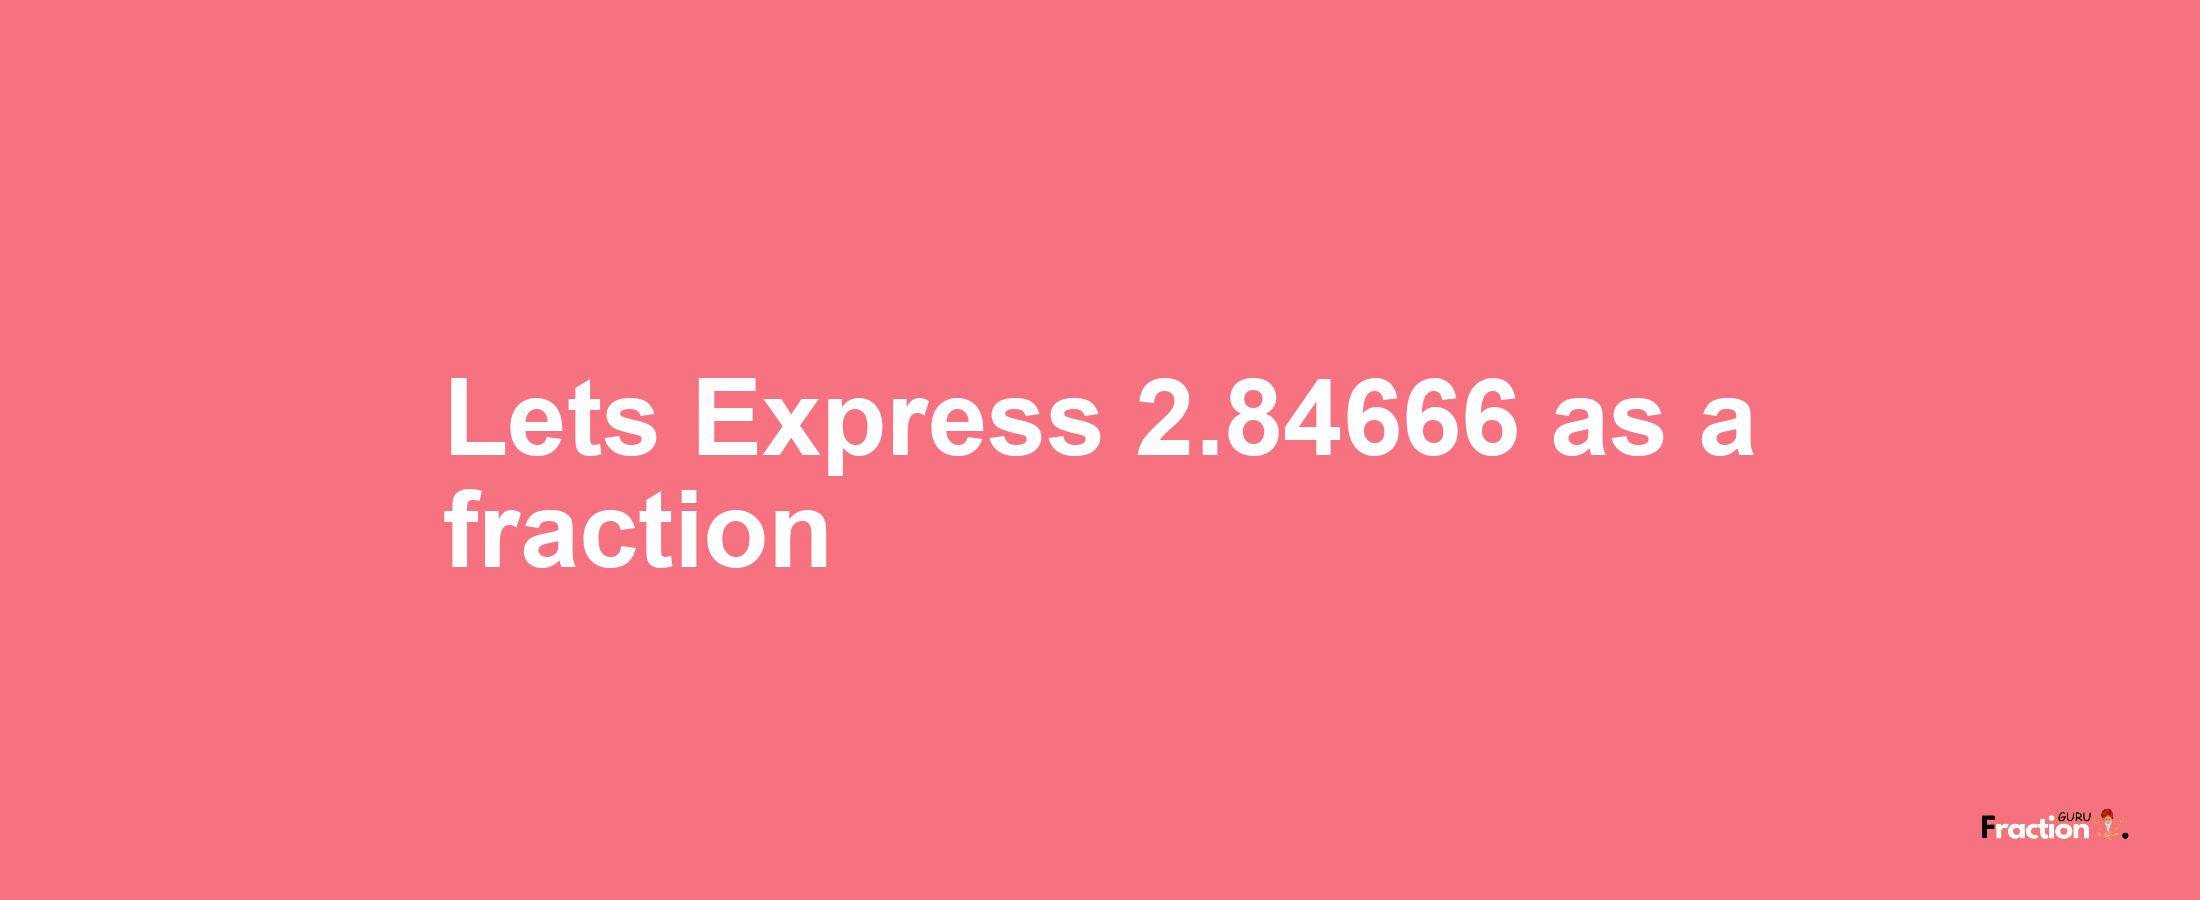 Lets Express 2.84666 as afraction